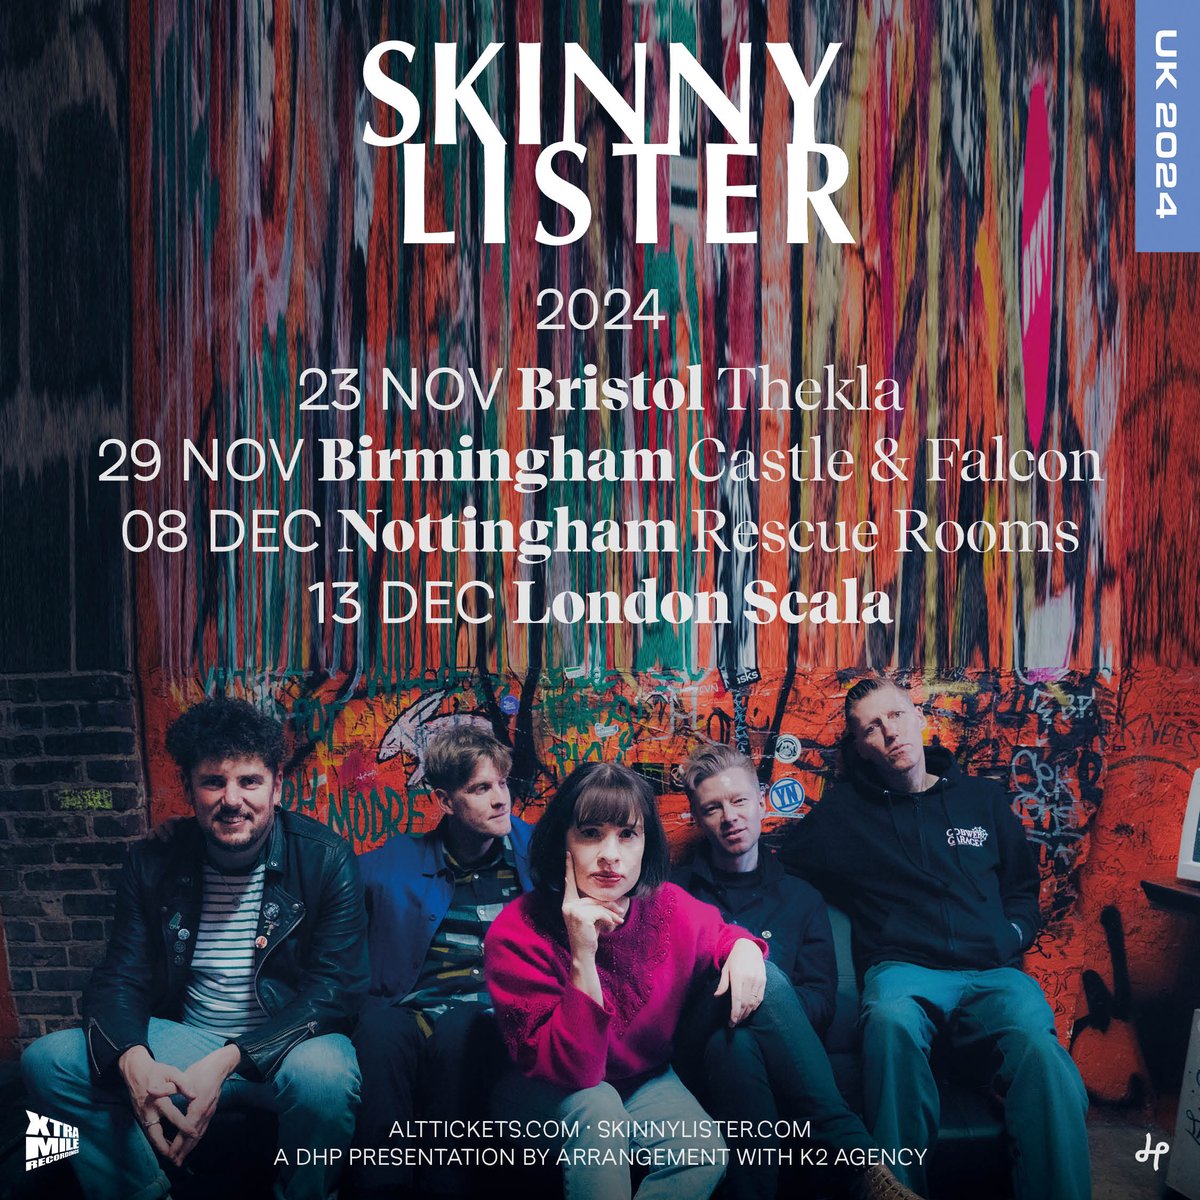 JUST ANNOUNCED: Skinny Lister on Dec 13! Following their 6th album Shanty Punk, which exemplified their unique brand of raucous folk-punk, they are hitting the road once again! We're thrilled to have them back. Tickets go live Friday @ 10am: scala.co.uk/events/skinny-…